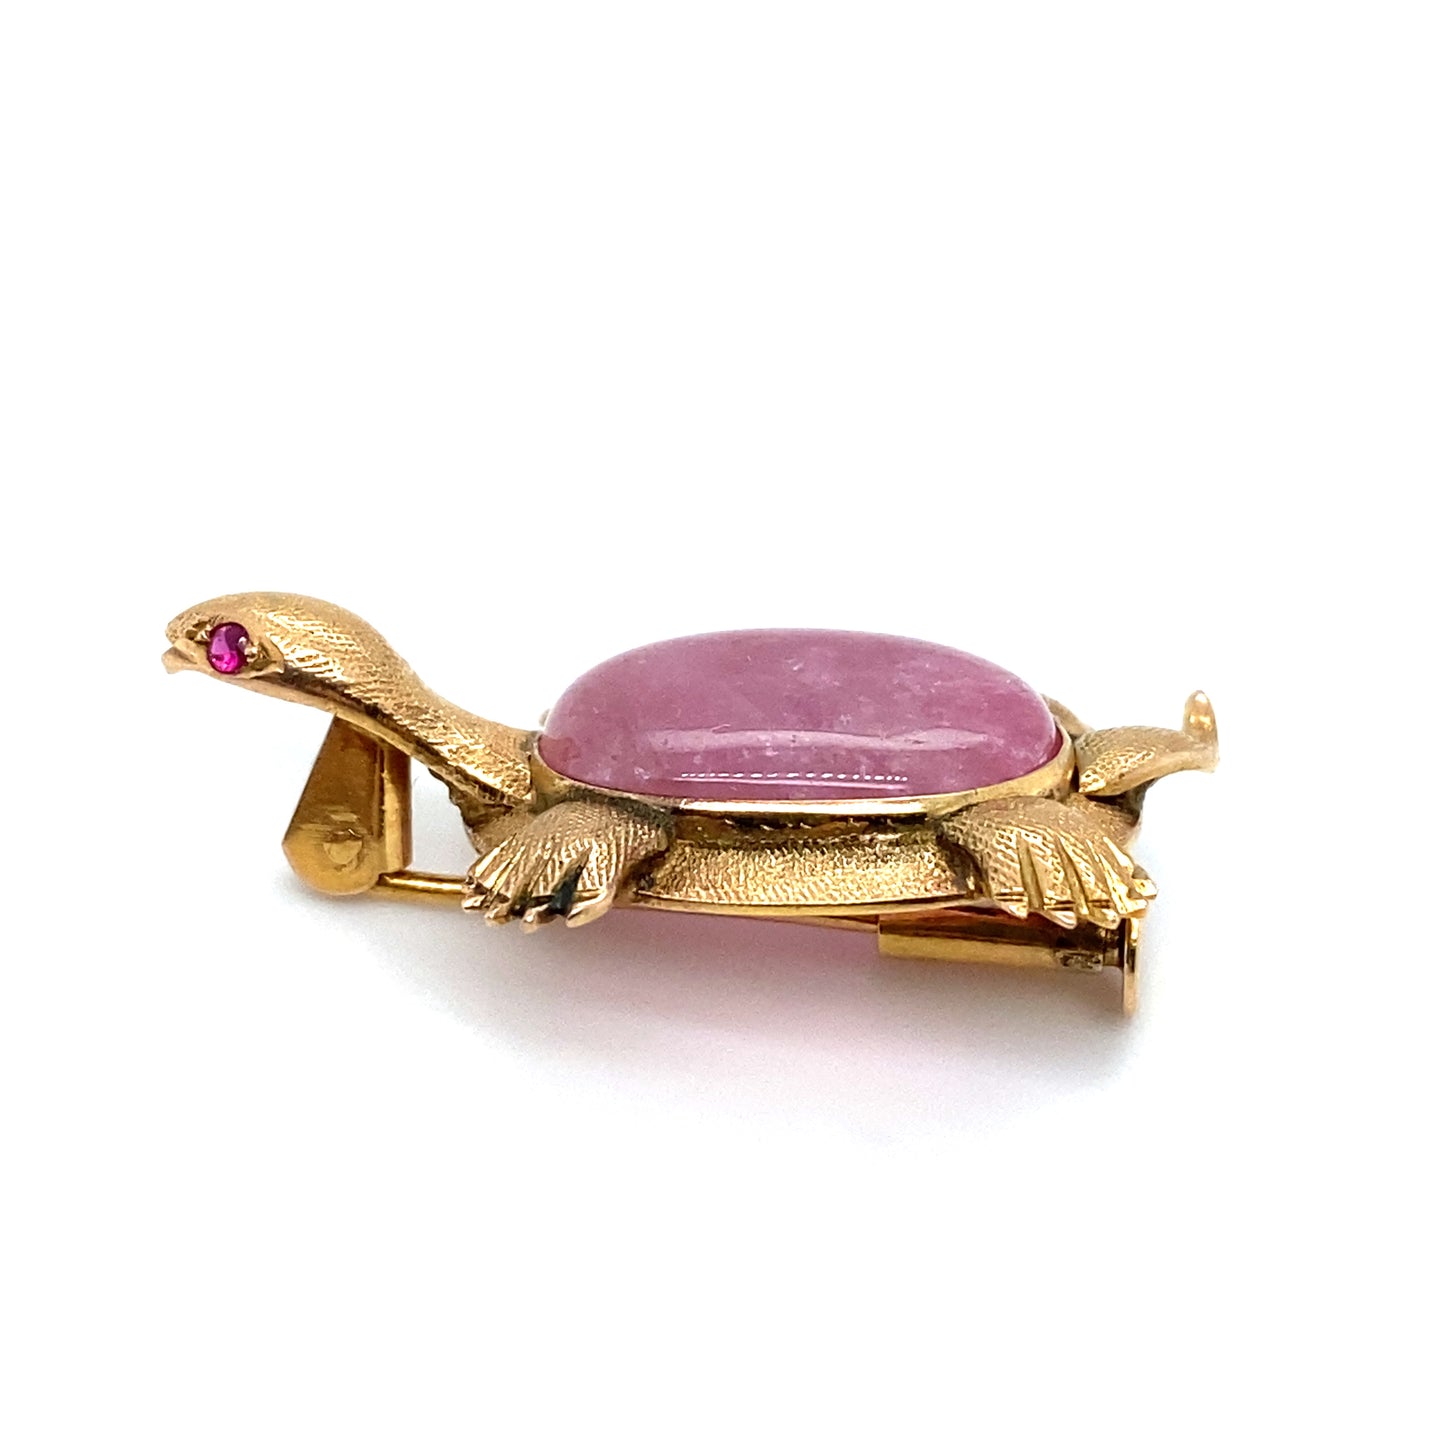 Circa 1960s Pink Tourmaline and Ruby Turtle Brooch in 14K Gold